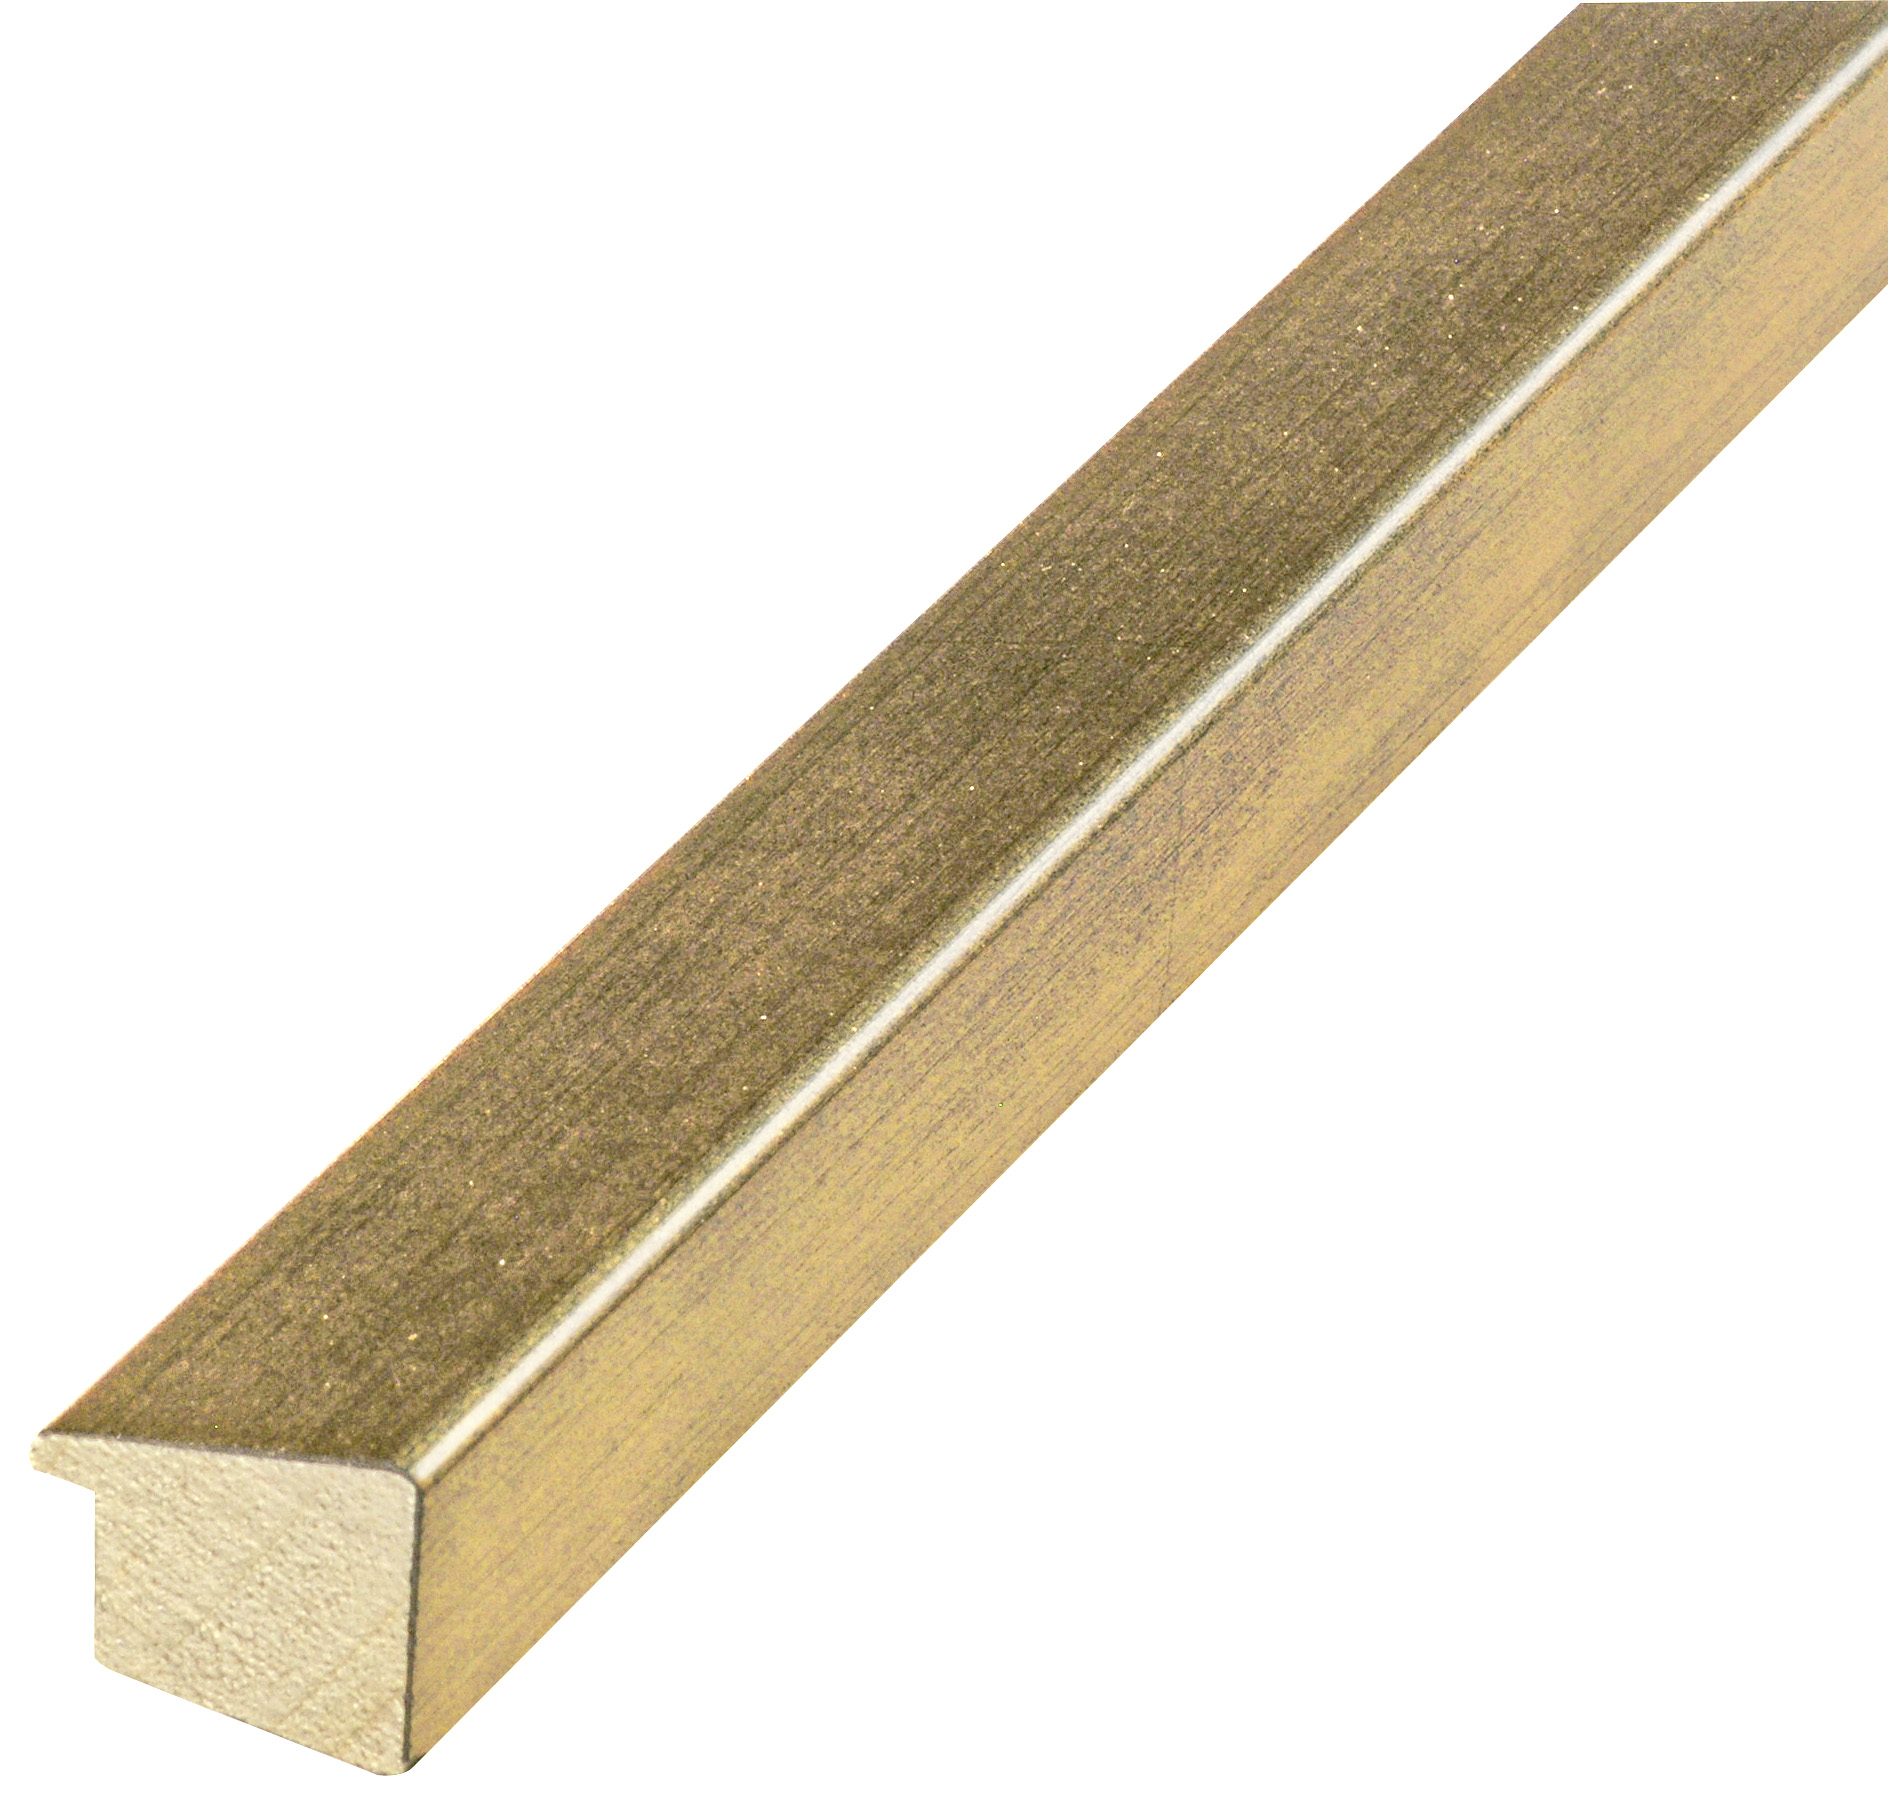 Moulding finger-jointed pine, width 23mm height 26 - gold finish